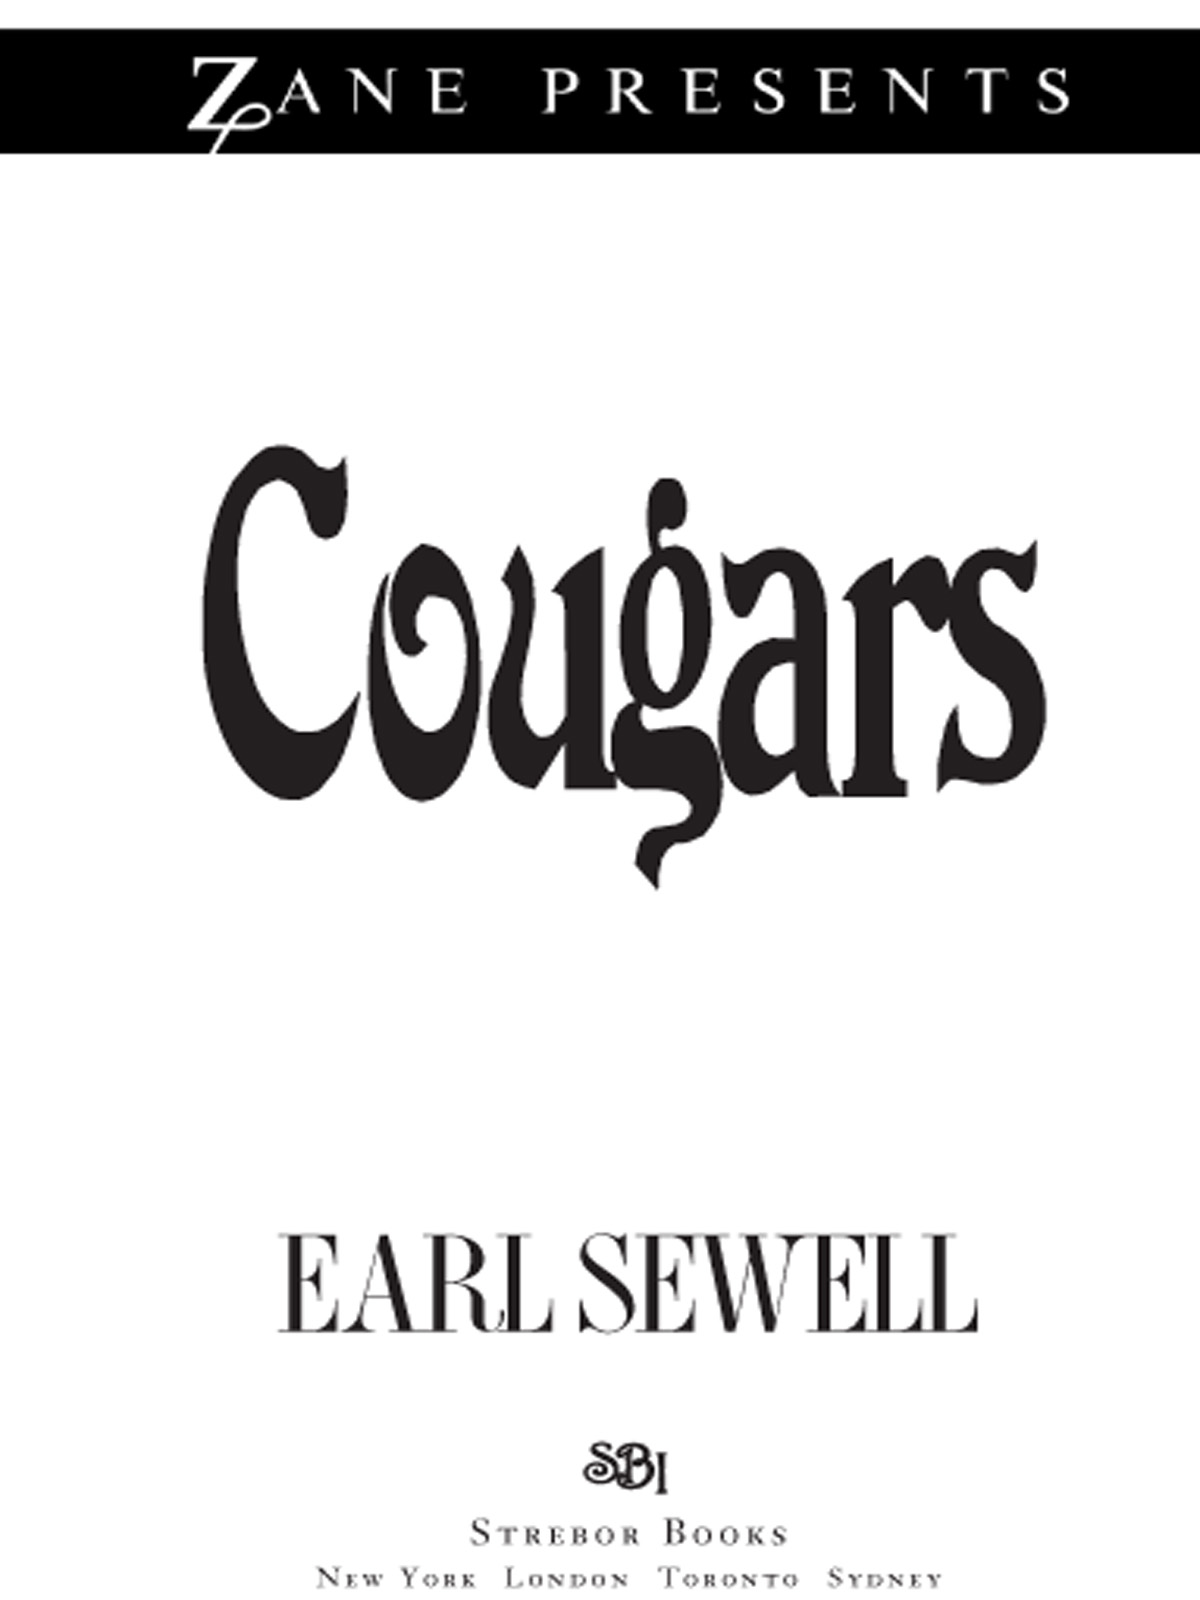 Cougars (2010) by Earl Sewell